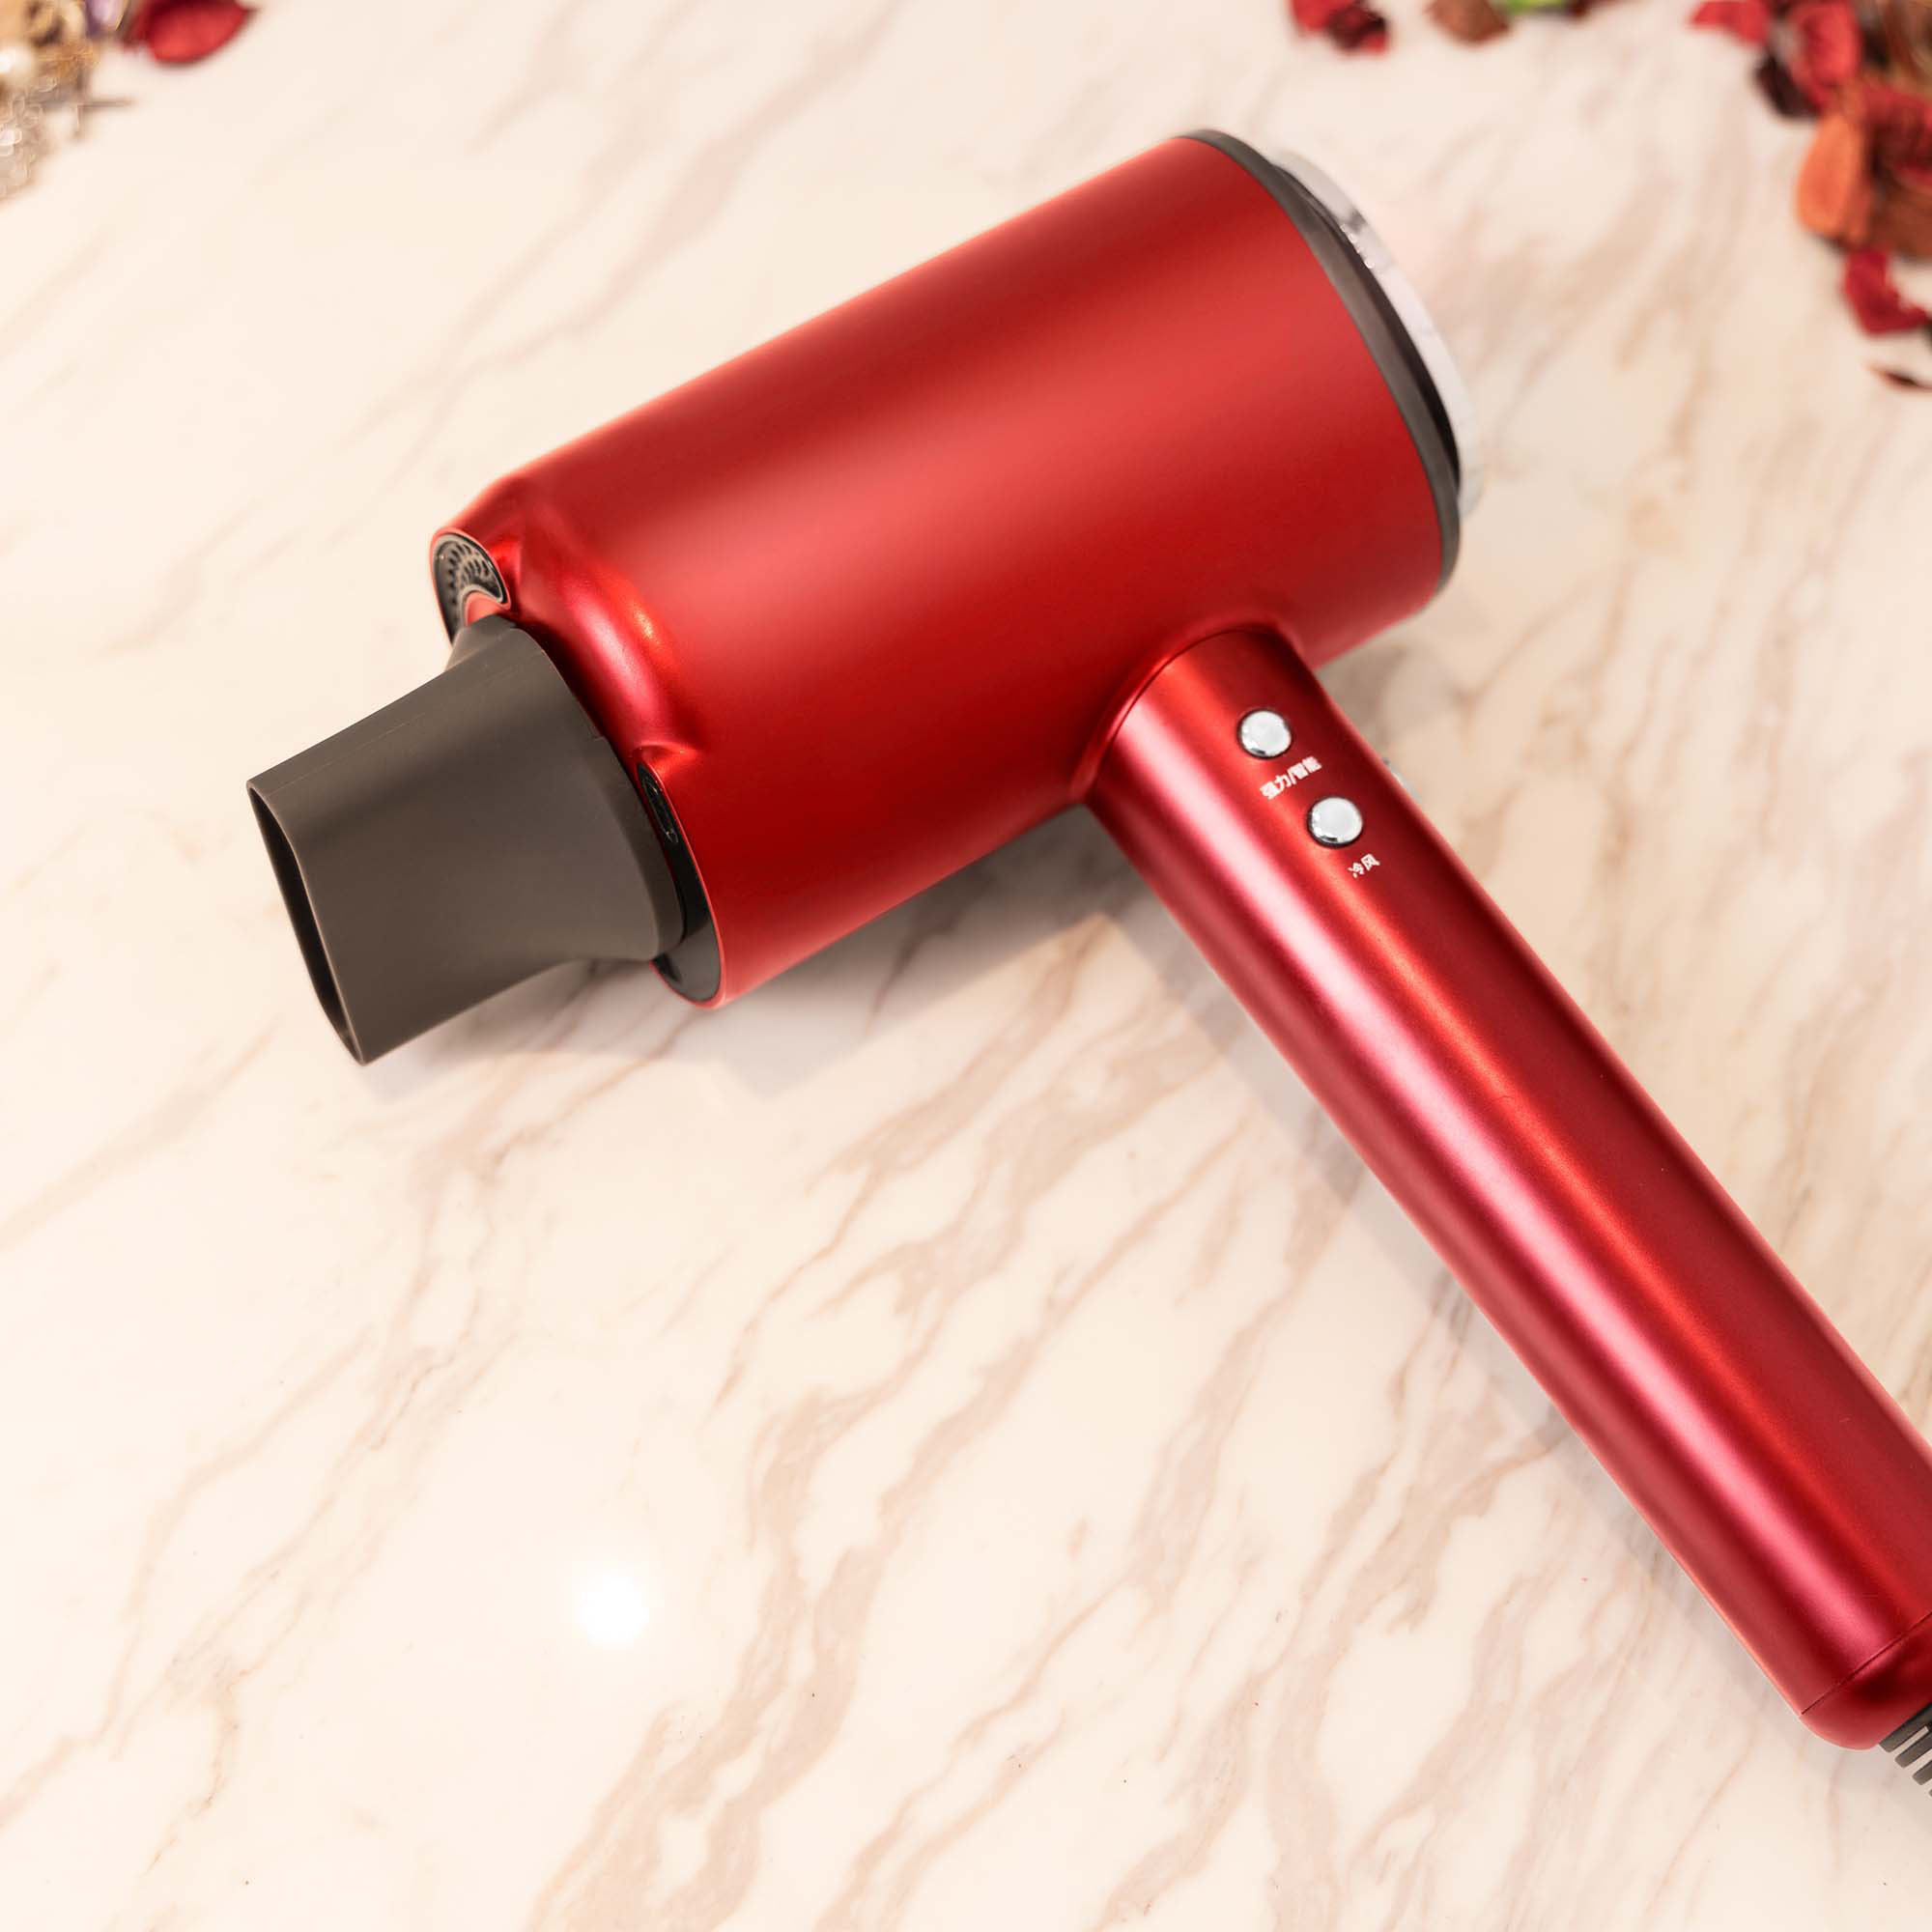 Back View: Tineco - Smart Ionic Hair Dryer - Red